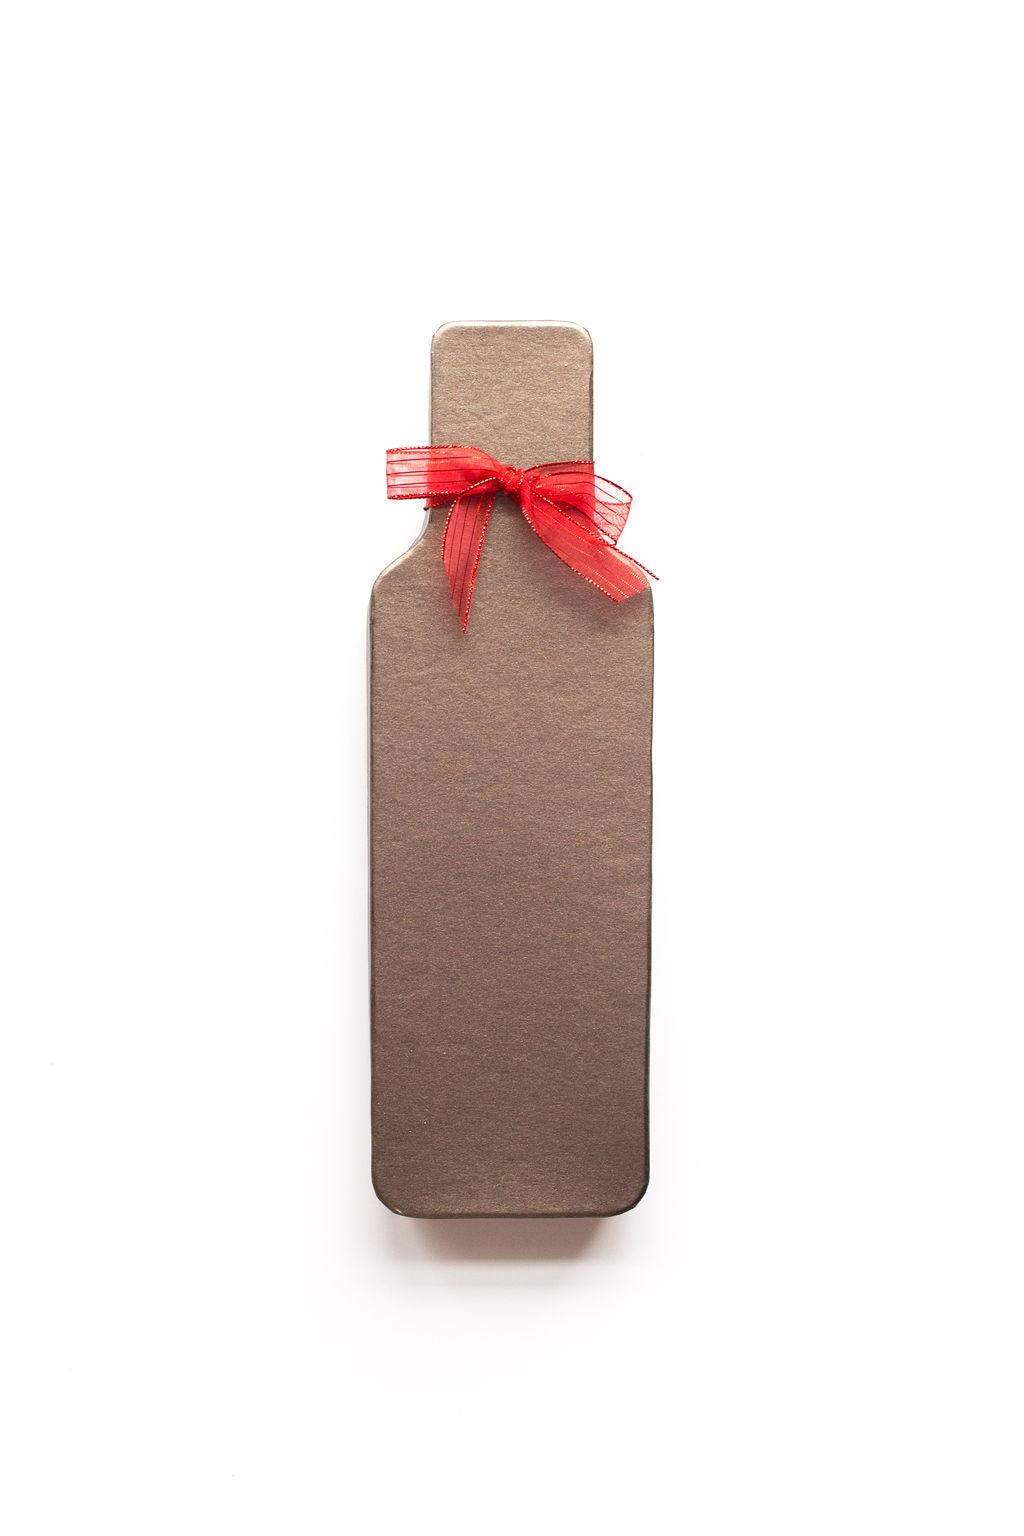 A Wine Bottle-Shaped Box of Sugar Plum&#39;s Chocolate Truffle with Red Ribbon